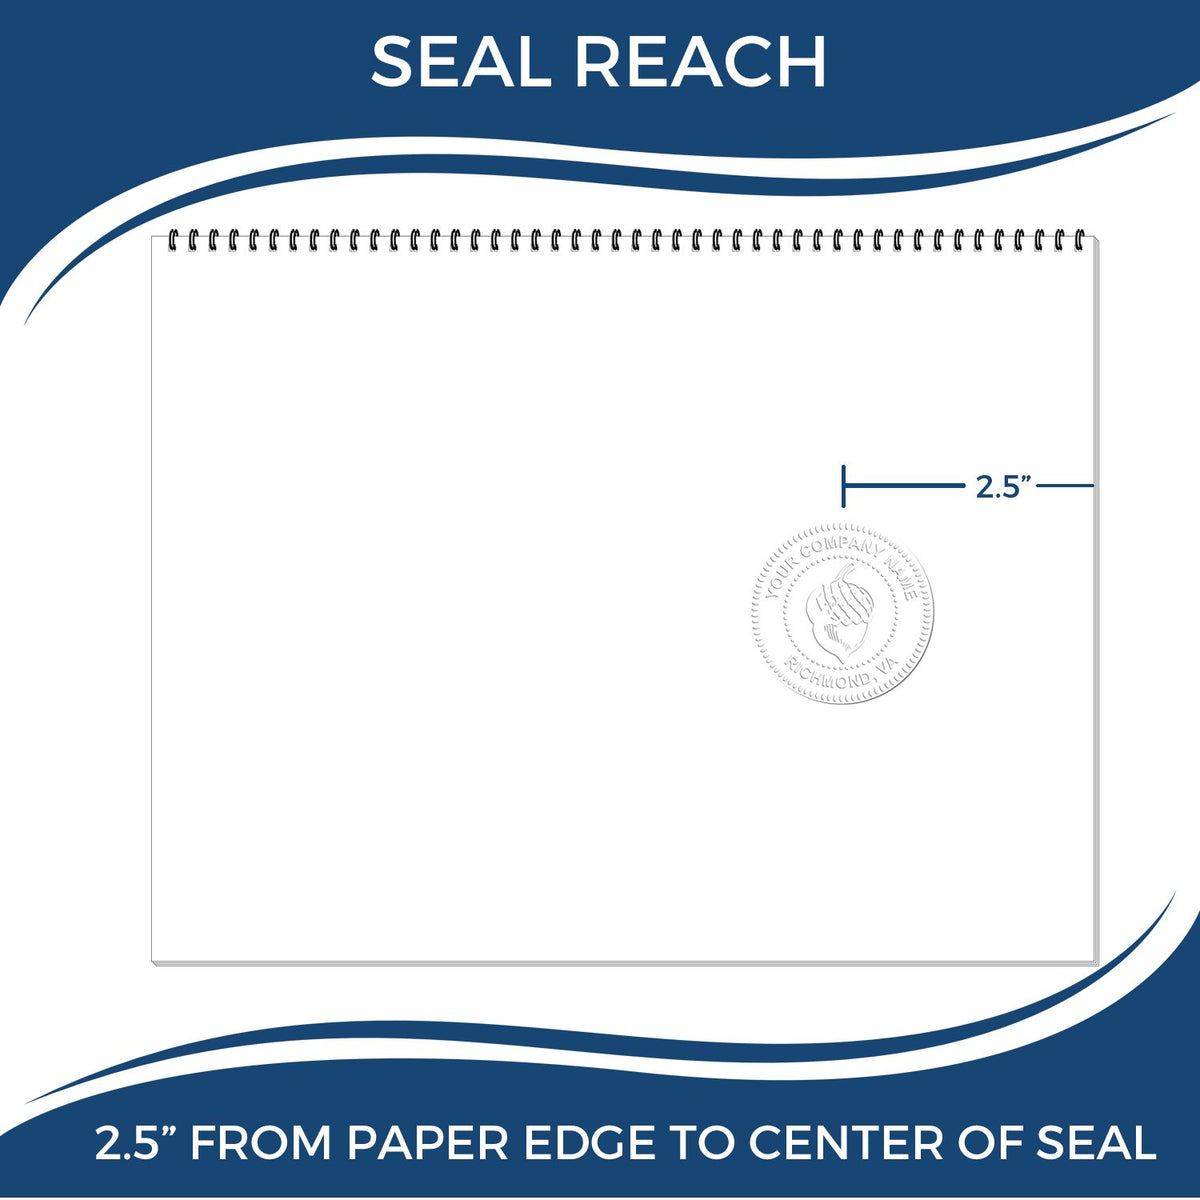 An infographic showing the seal reach which is represented by a ruler and a miniature seal image of the Heavy Duty Cast Iron Connecticut Land Surveyor Seal Embosser